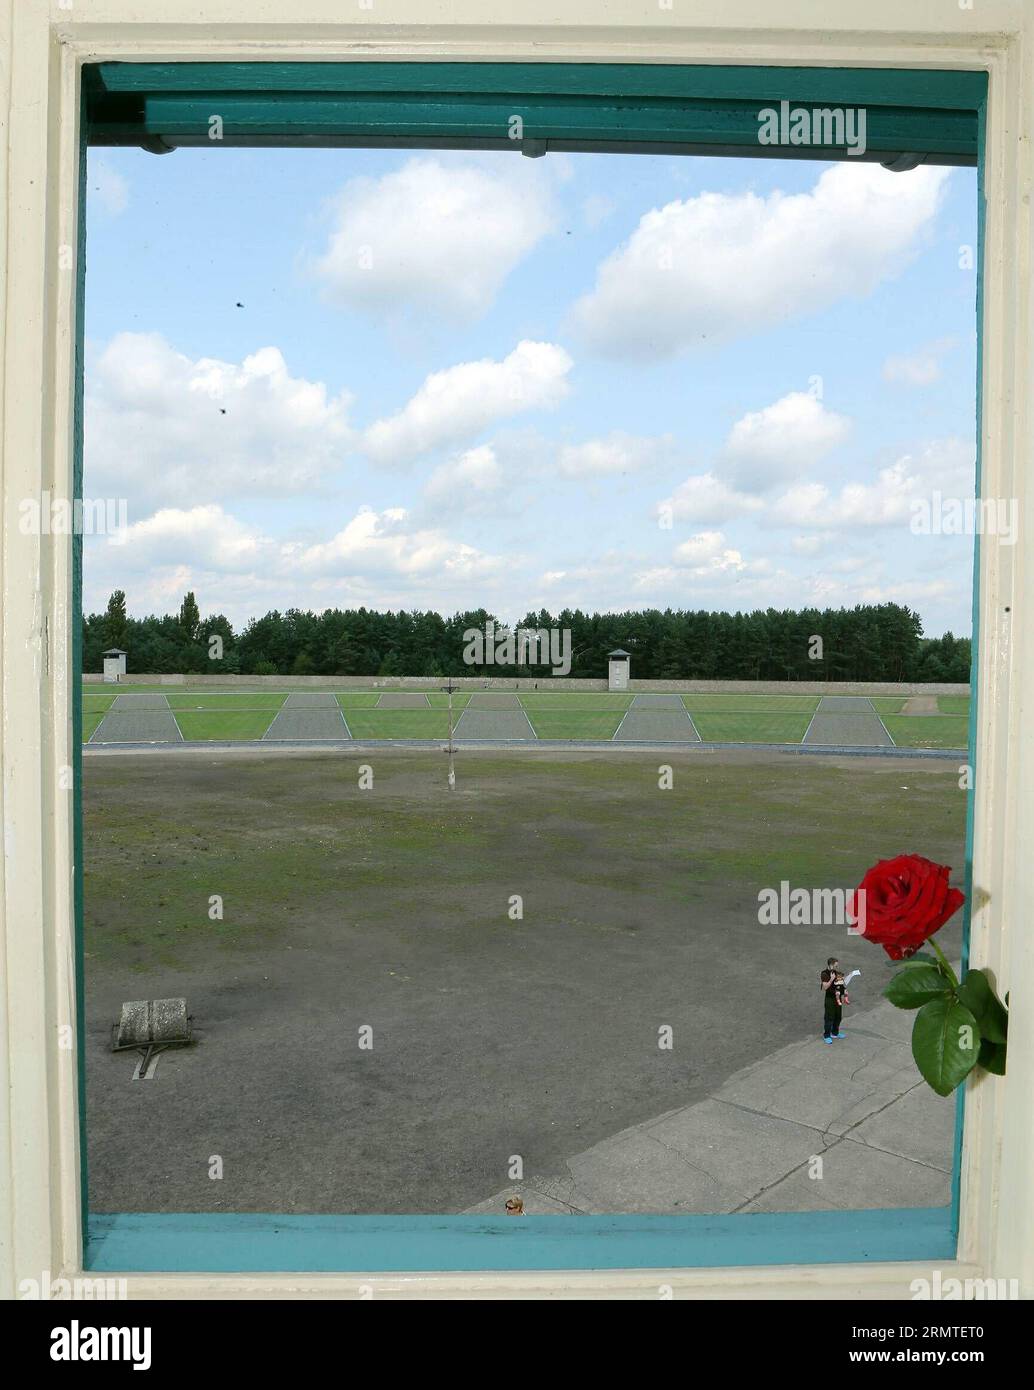 (140901) -- FRANKFURT (GERMANY), Sept. 1, 2014 -- The former Sachsenhausen Nazi concentration camp is seen through a window of tower A in Oranienburg, near Berlin, Germany, on Aug. 21, 2014. The Sachsenhausen Nazi concentration camp was built in Oranienburg about 35 km north of Berlin in 1936 and imprisoned about 220,000 people between 1936 and 1945. The site now served as a memorial and museum to learn about the history within the authentic surroundings, including the remnants of buildings and other relics of the camp. ) GERMANY-SACHSENHAUSEN CONCENTRATION CAMP luoxhuanhuan PUBLICATIONxNOTxIN Stock Photo